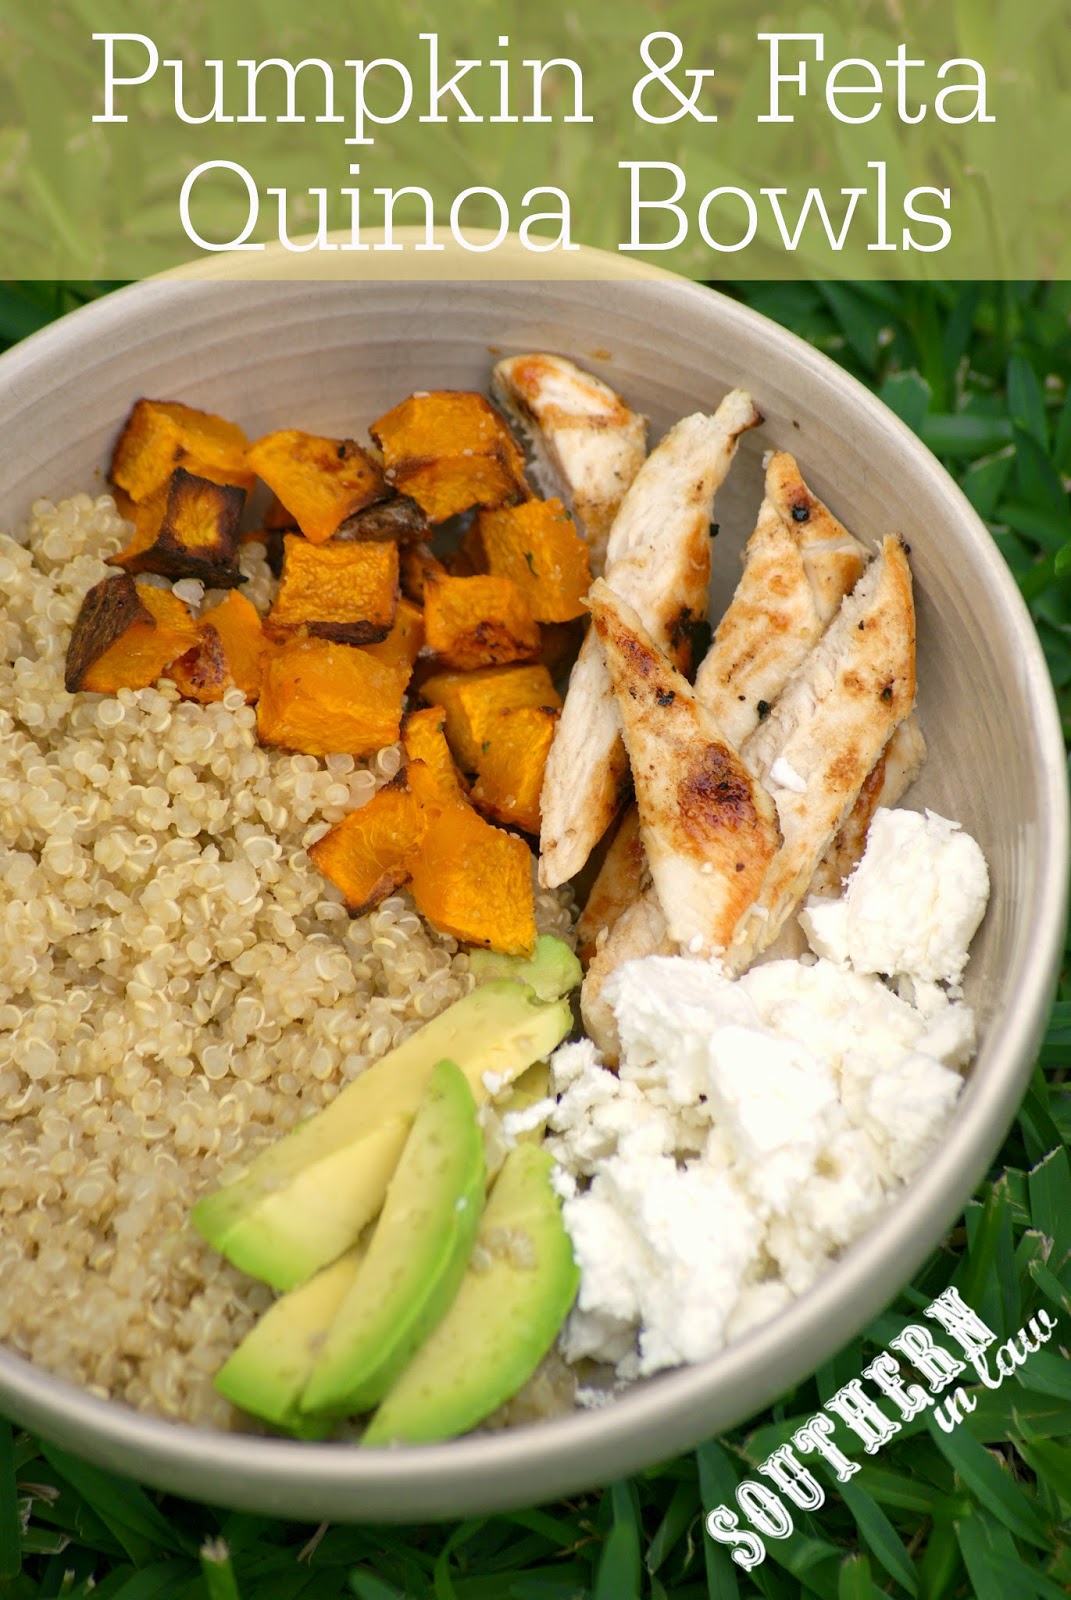 Healthy Roasted Pumpkin and Feta Quinoa Bowls Recipe - low fat, gluten free, vegetarian, clean eating friendly, lower carb, high protein, healthy